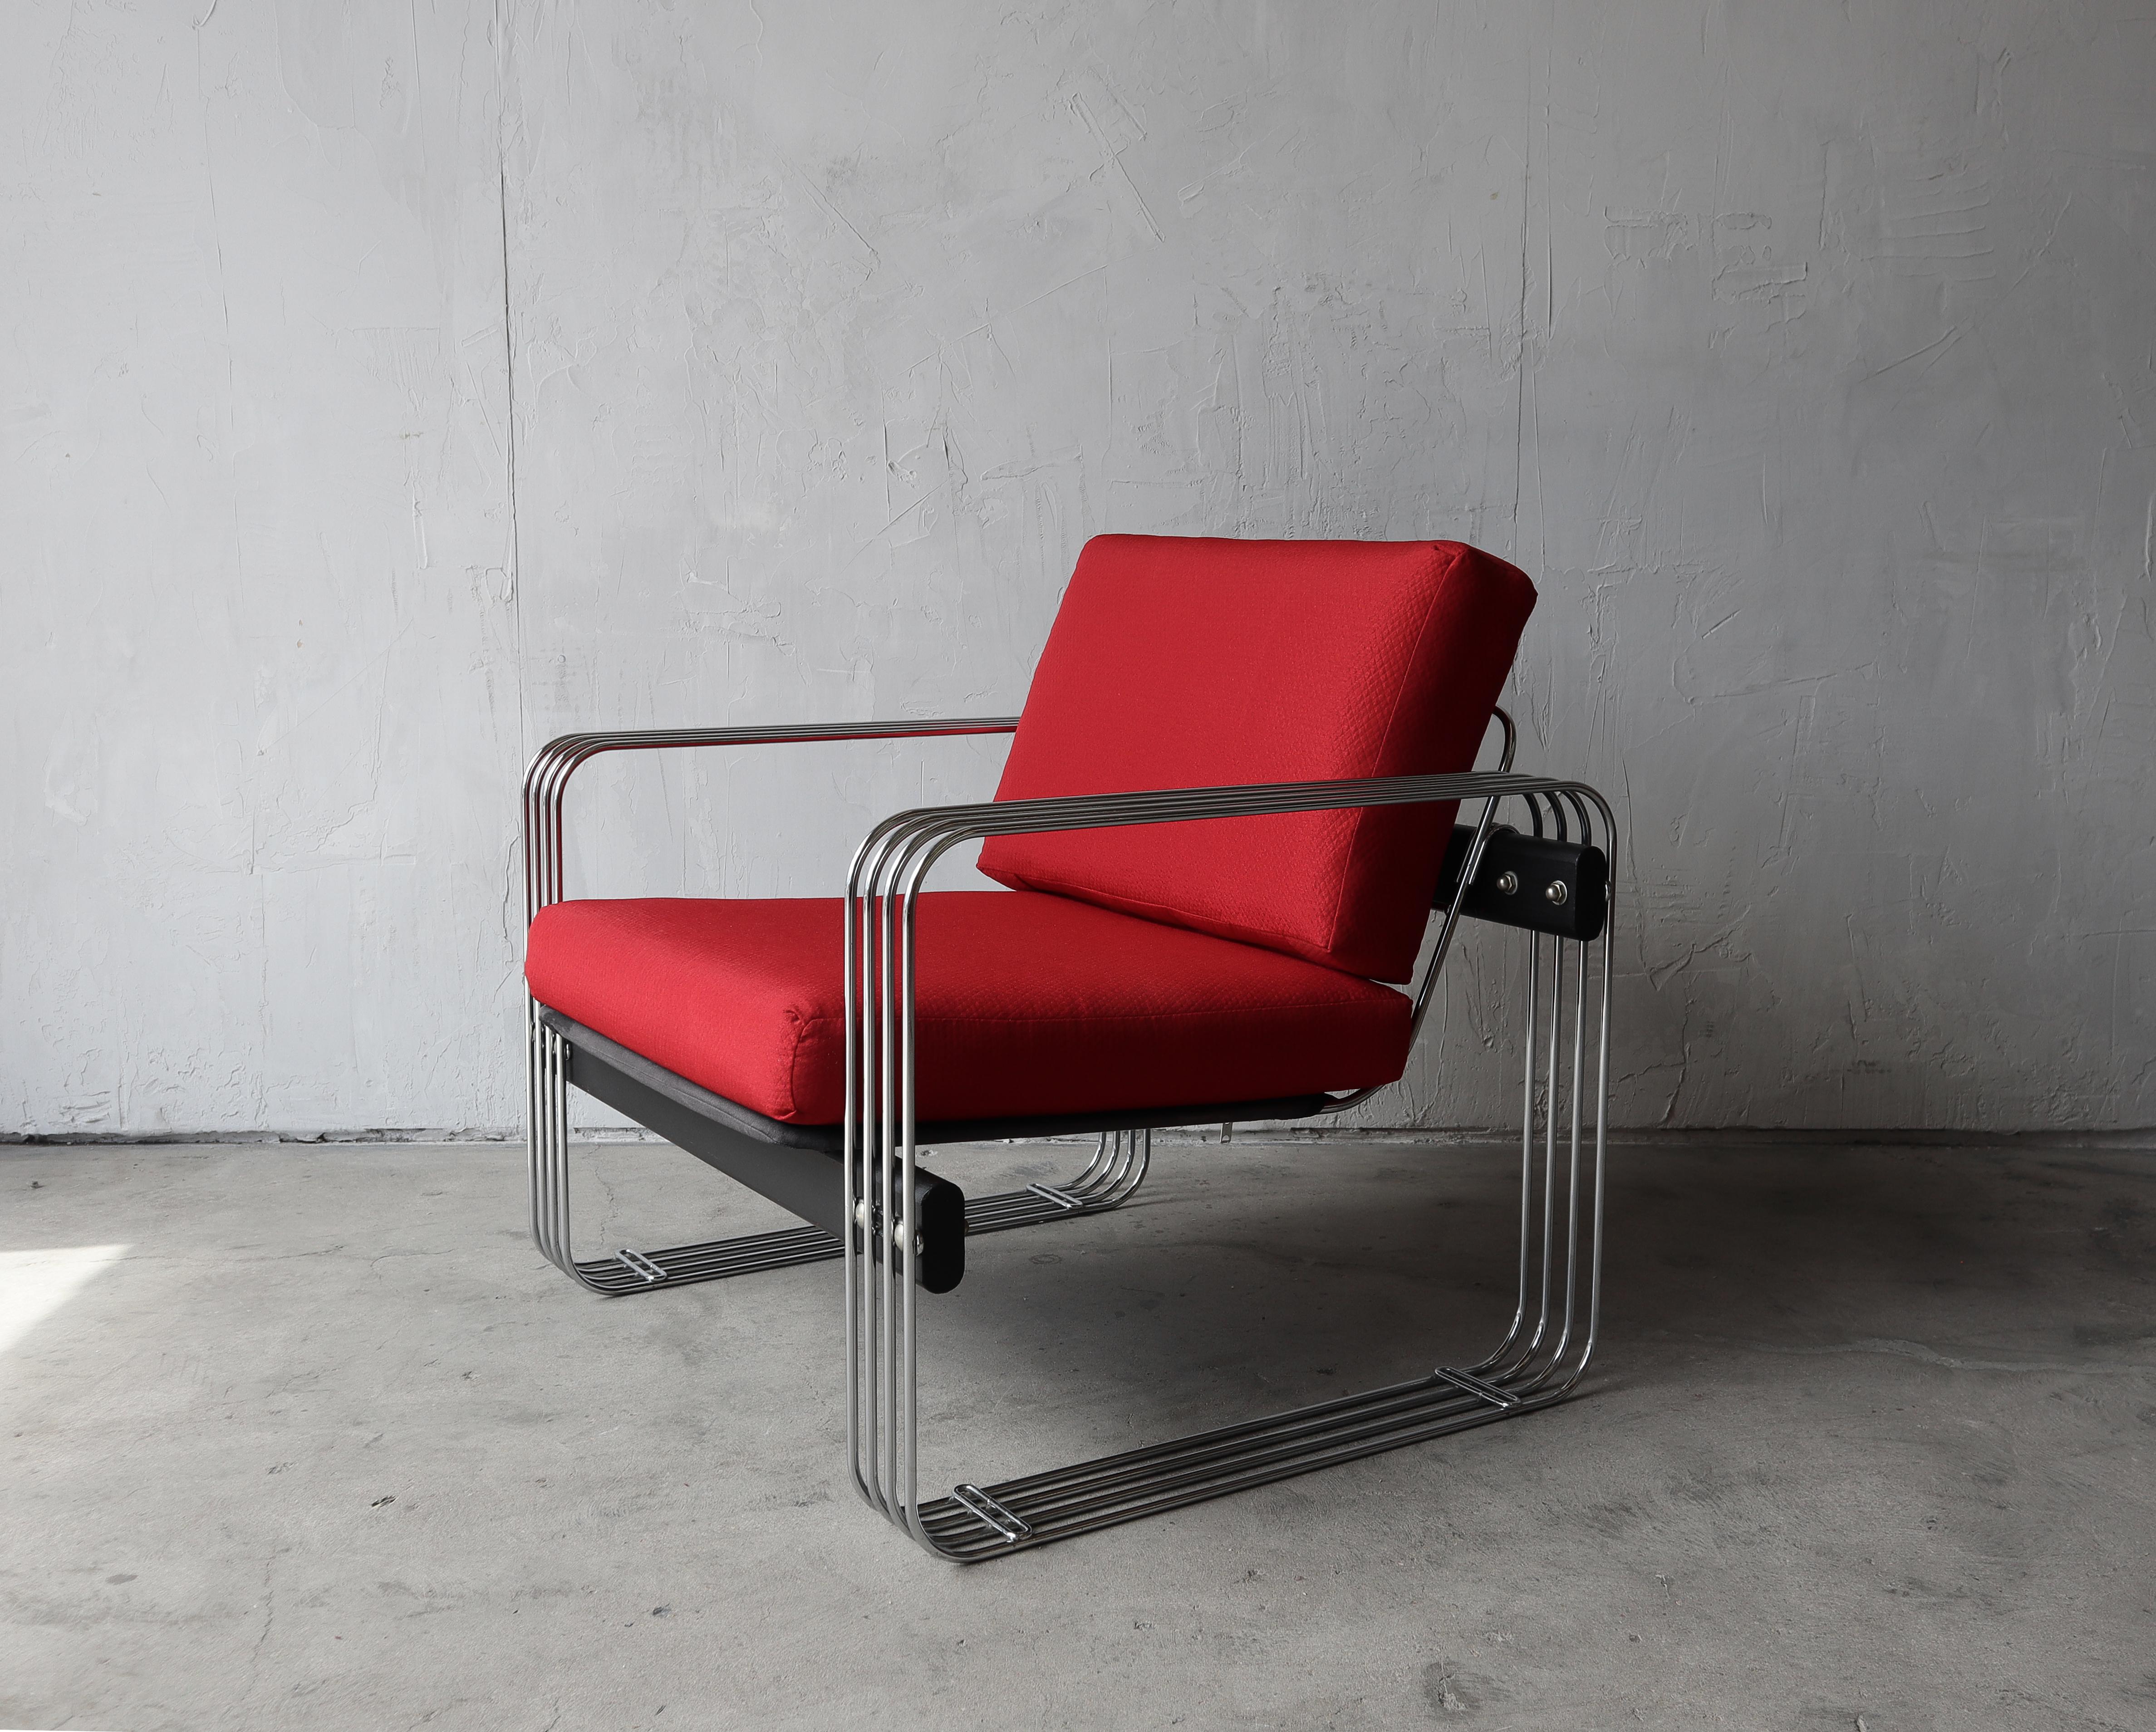 Nice Mid-Century Modern lounge chair by Heinz Meier for Landes Furniture. The chair has a chrome rod and wood frame and removable cushions. 

Overall the chair is in great condition. The red upholstery is in good condition and free of any damage,